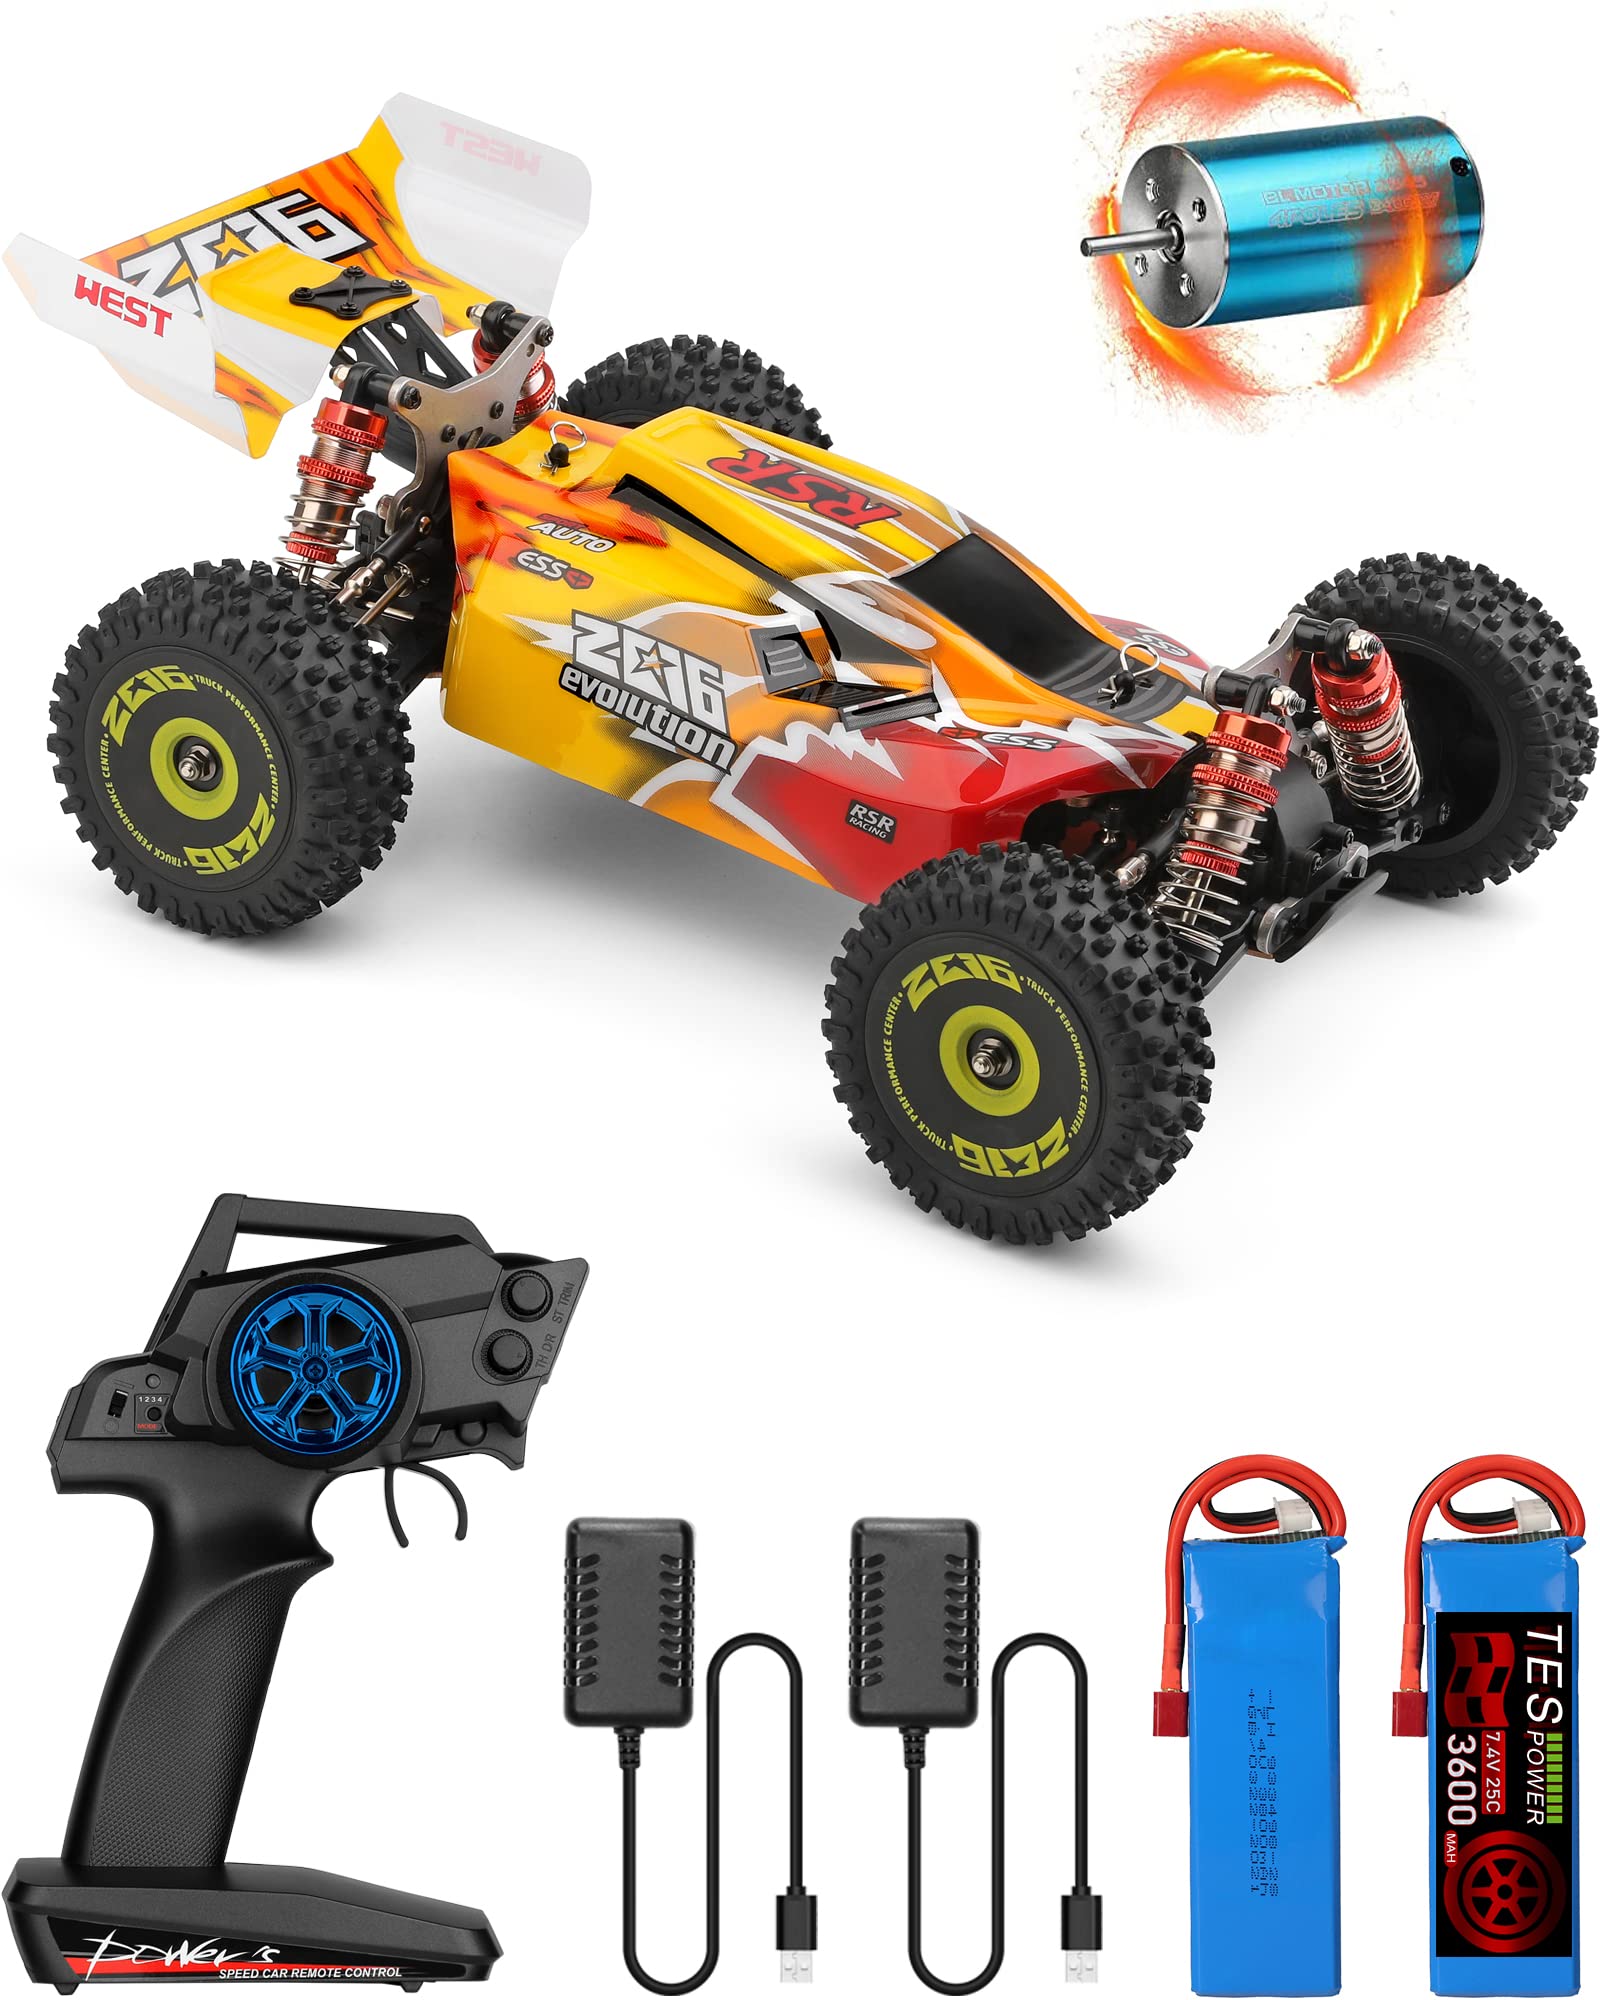 TesPower 75Kmh Brushless Rc Car Wltoys 144010 Remote Control Car Wltoys 144001 Upgrade Brushless Motor Top Speed 4Wd 1:14 Buggy With Meta